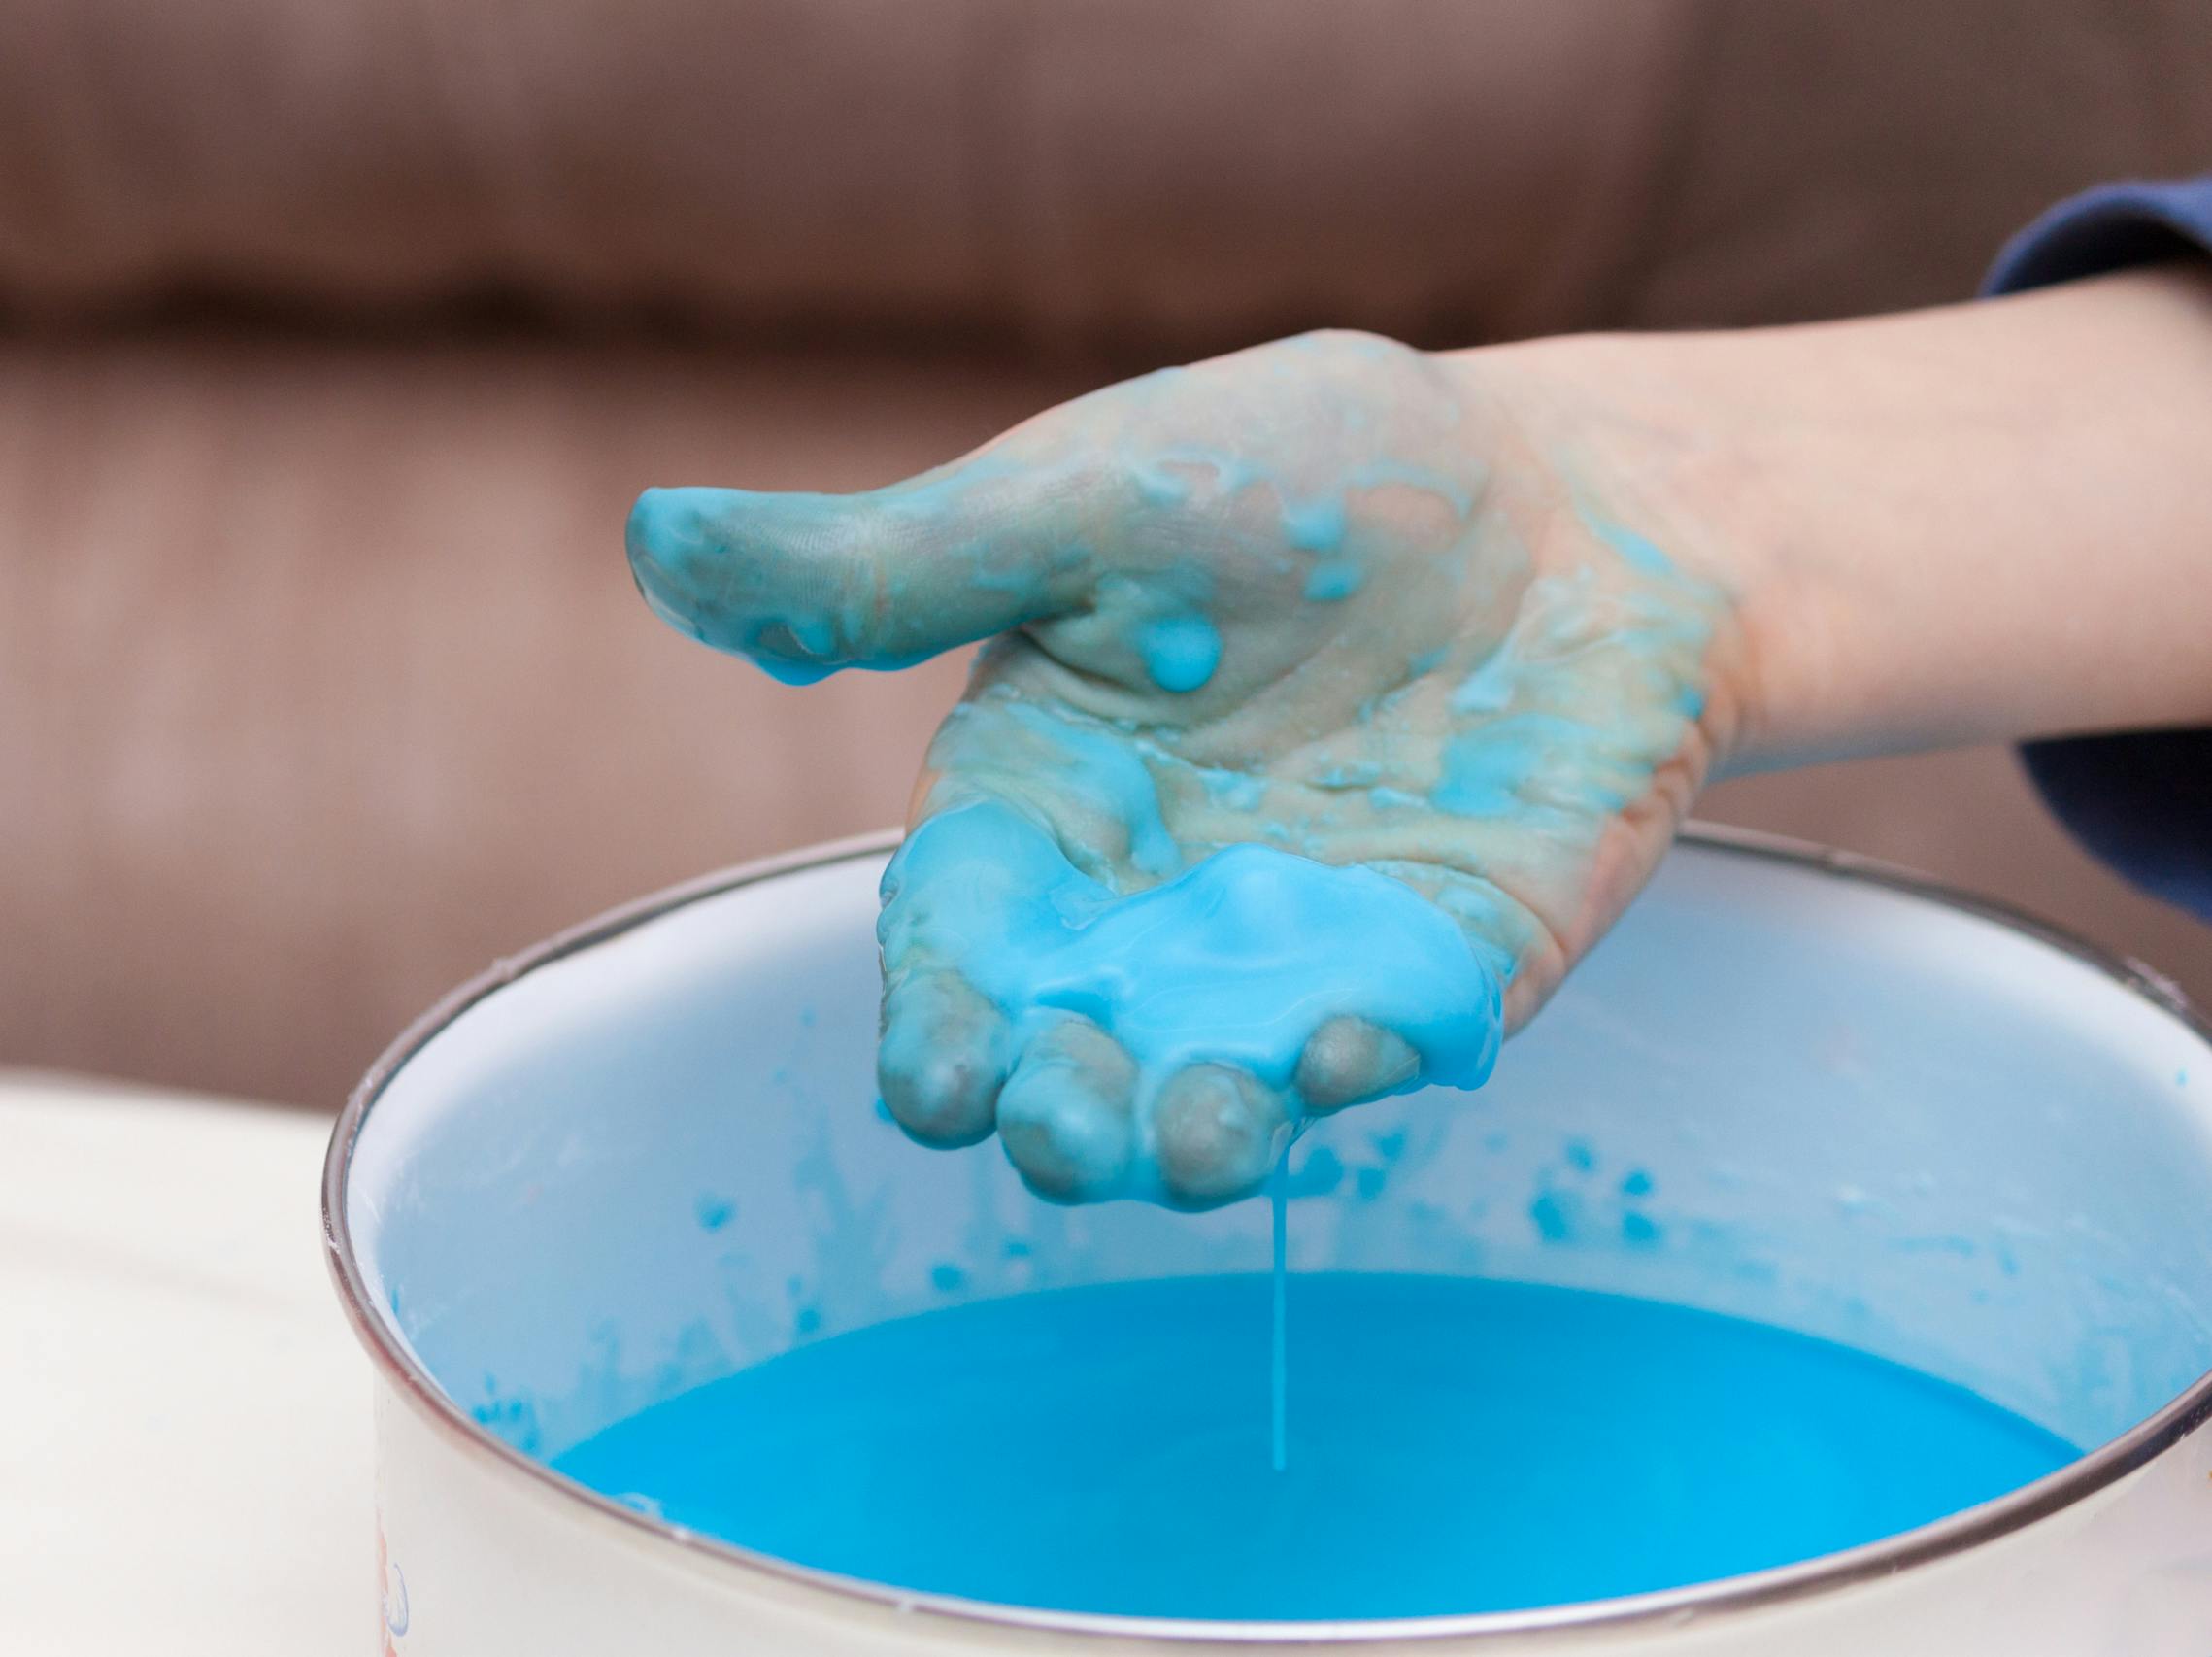 A childs hand holding some cornstarch and water mixture that has been dyed blue over a bowl of the mixture